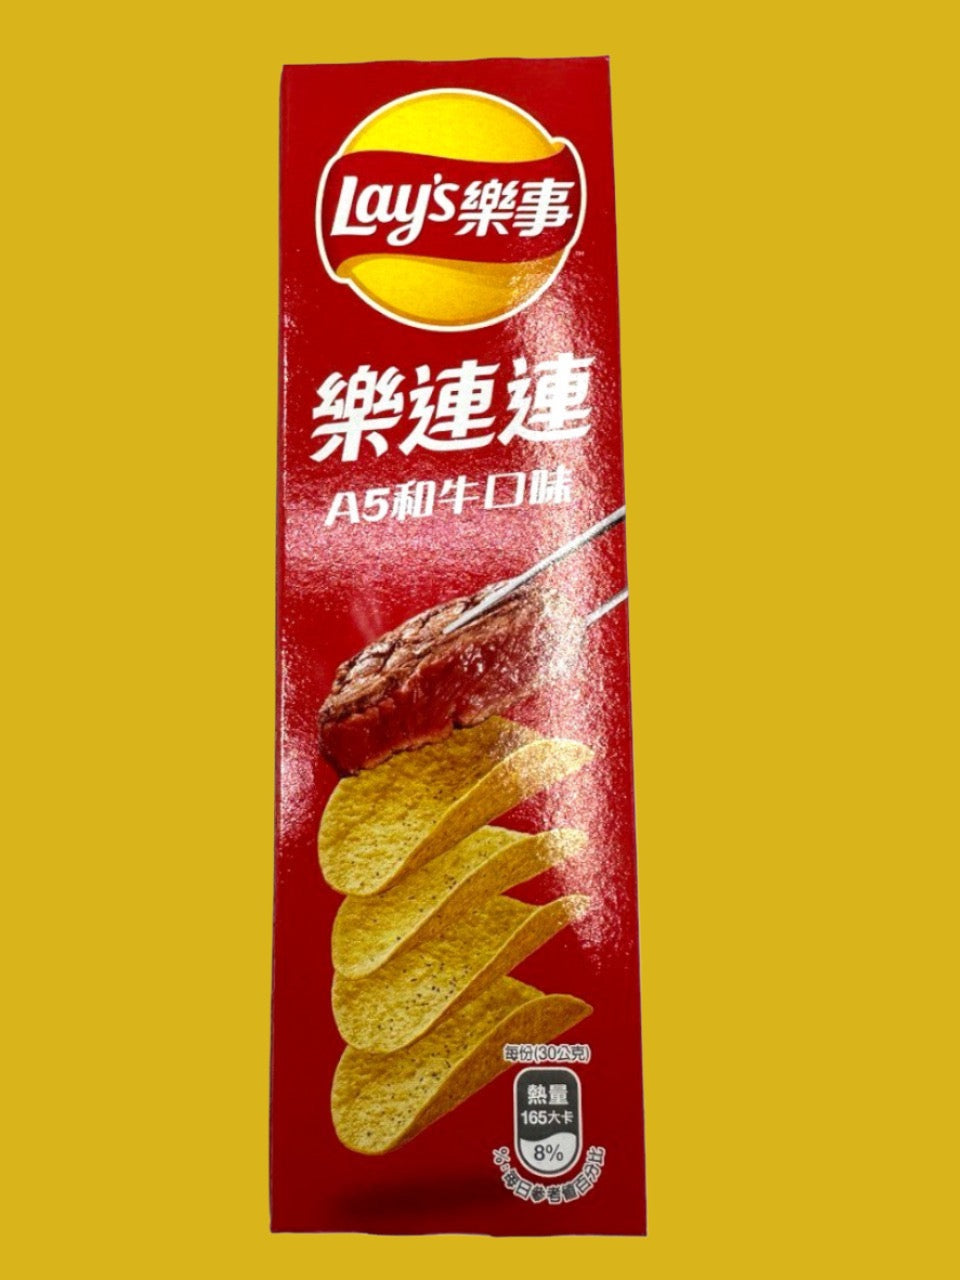 Lay's Stax A5 Beef (CHINA)